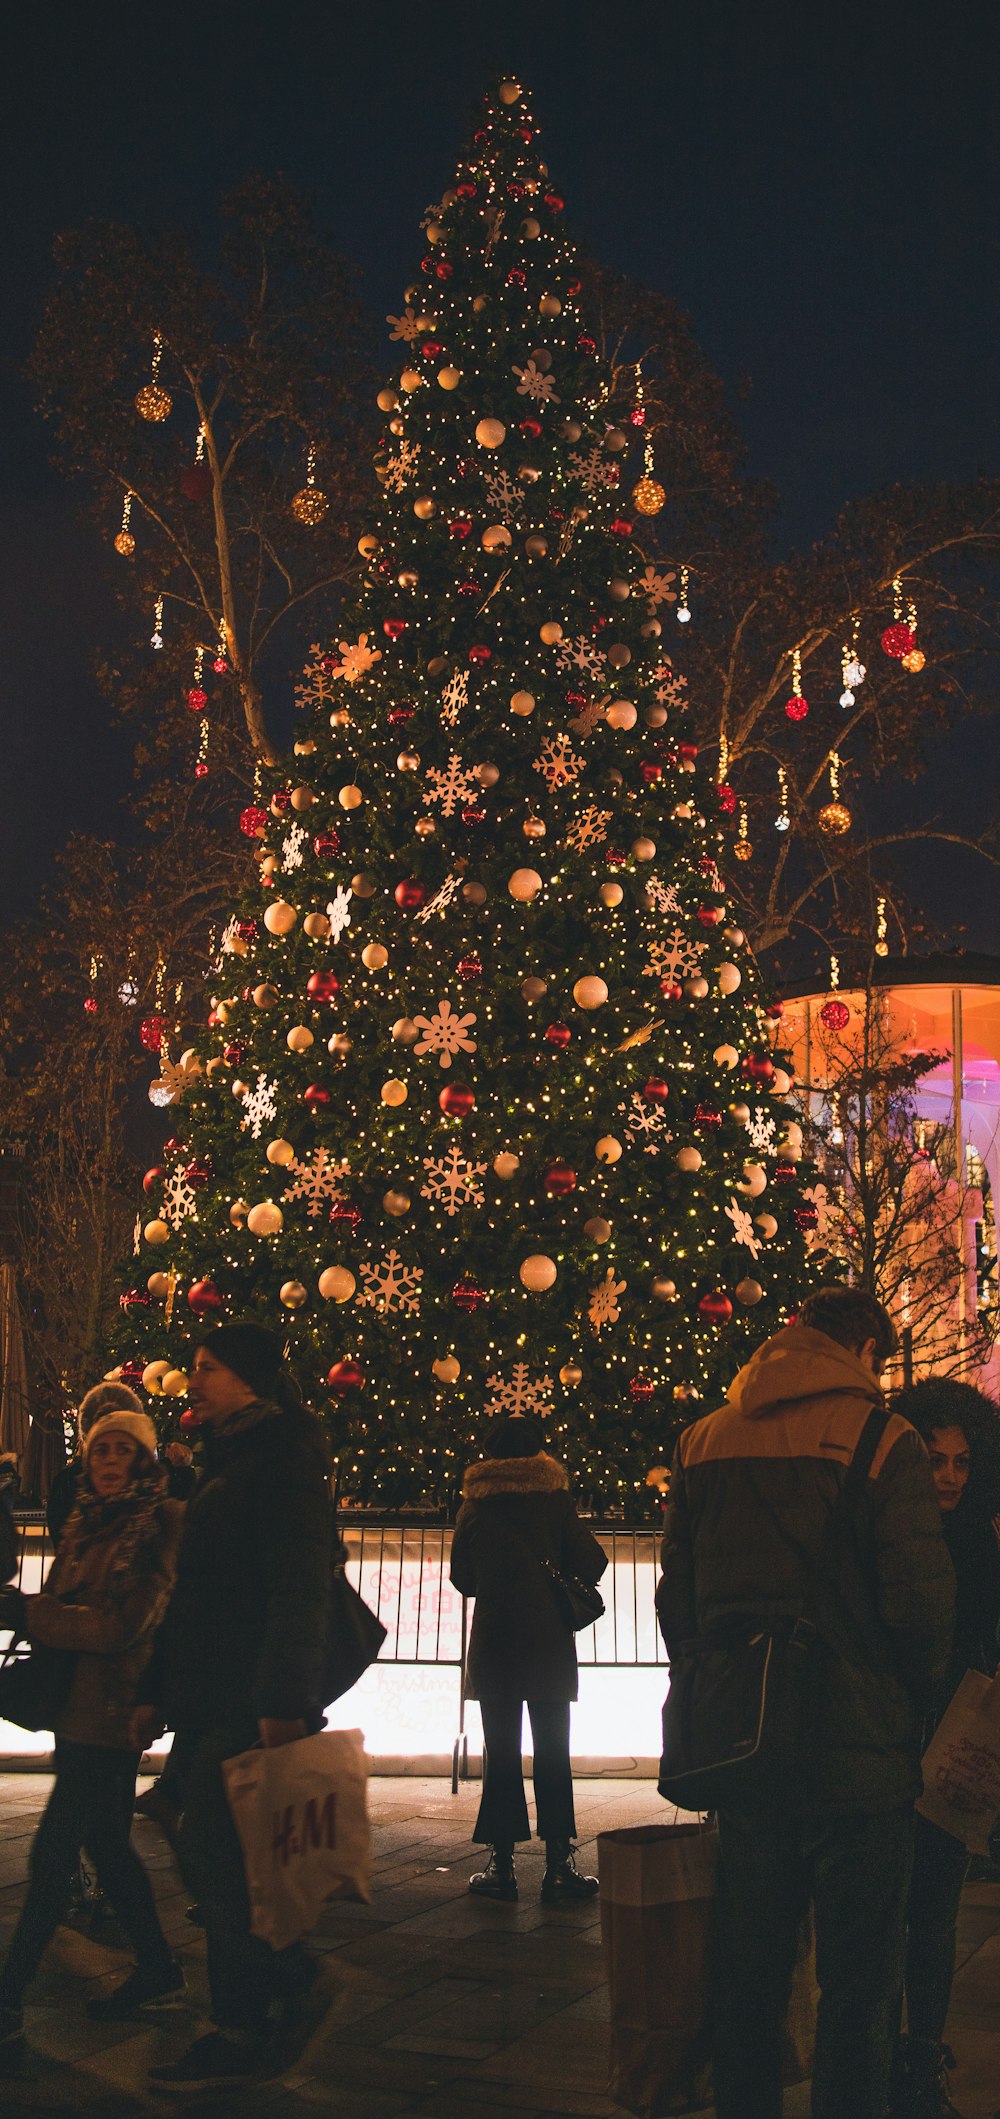 people standing near outdoor Christmas tree during night time